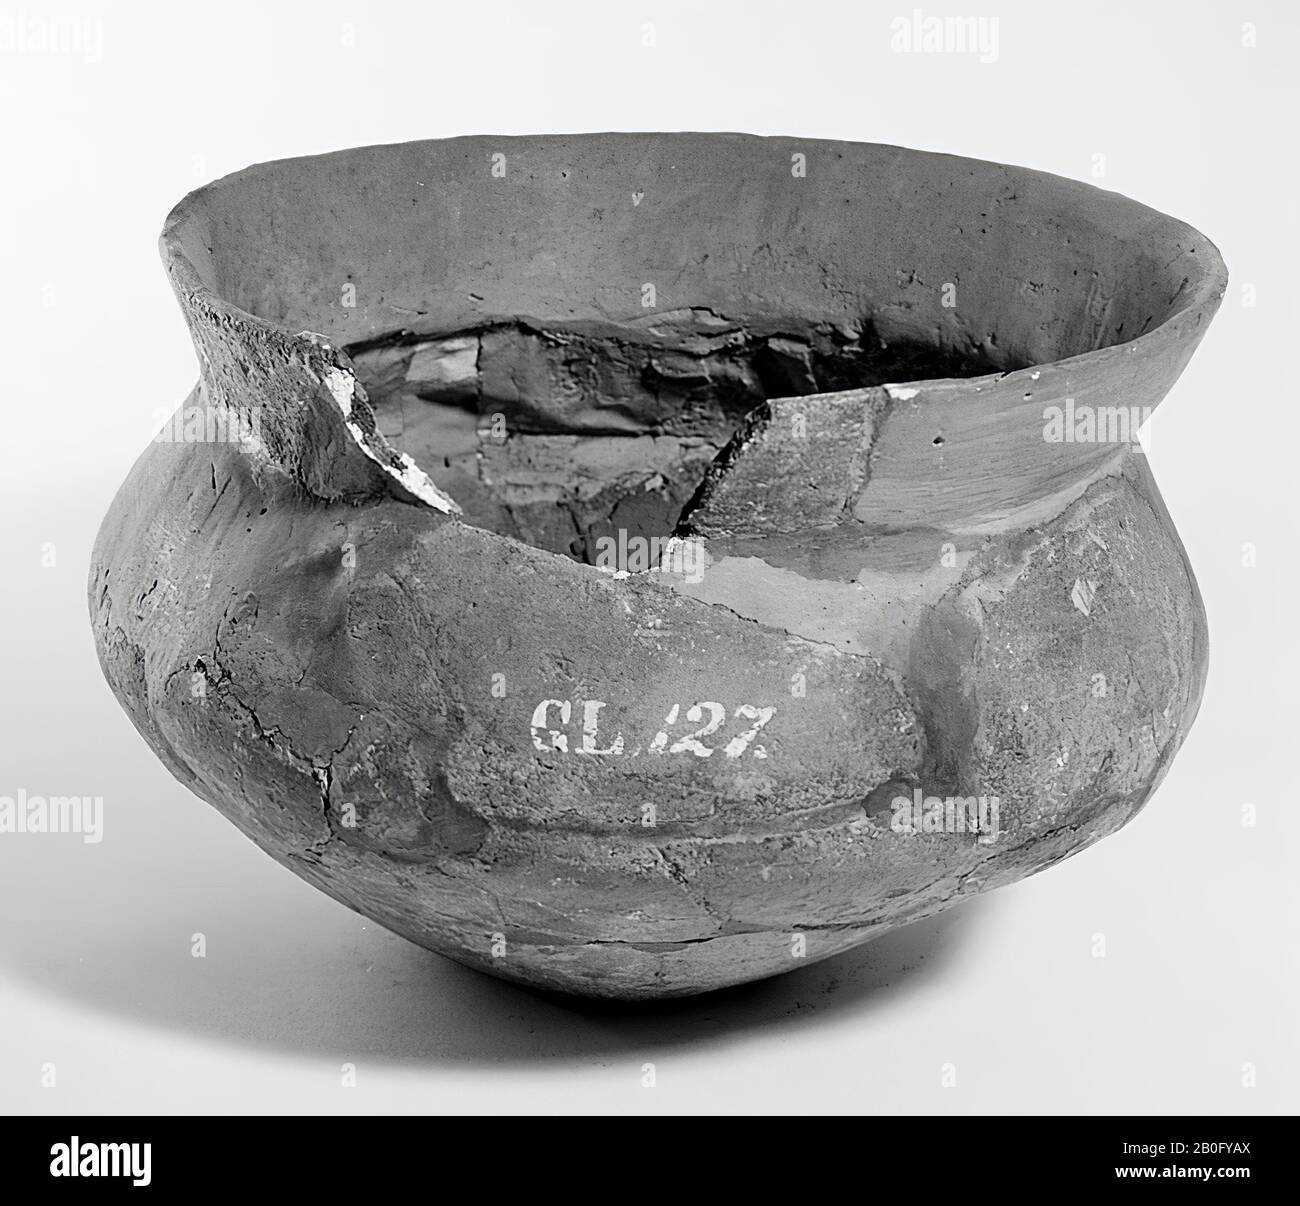 Dark gray urn of earthenware with outstanding edge. Old bondings and additions, 1 loose edge shard., Urn, earthenware, h: 16.3 cm, diam: 23 cm, prehistory -1200 Stock Photo